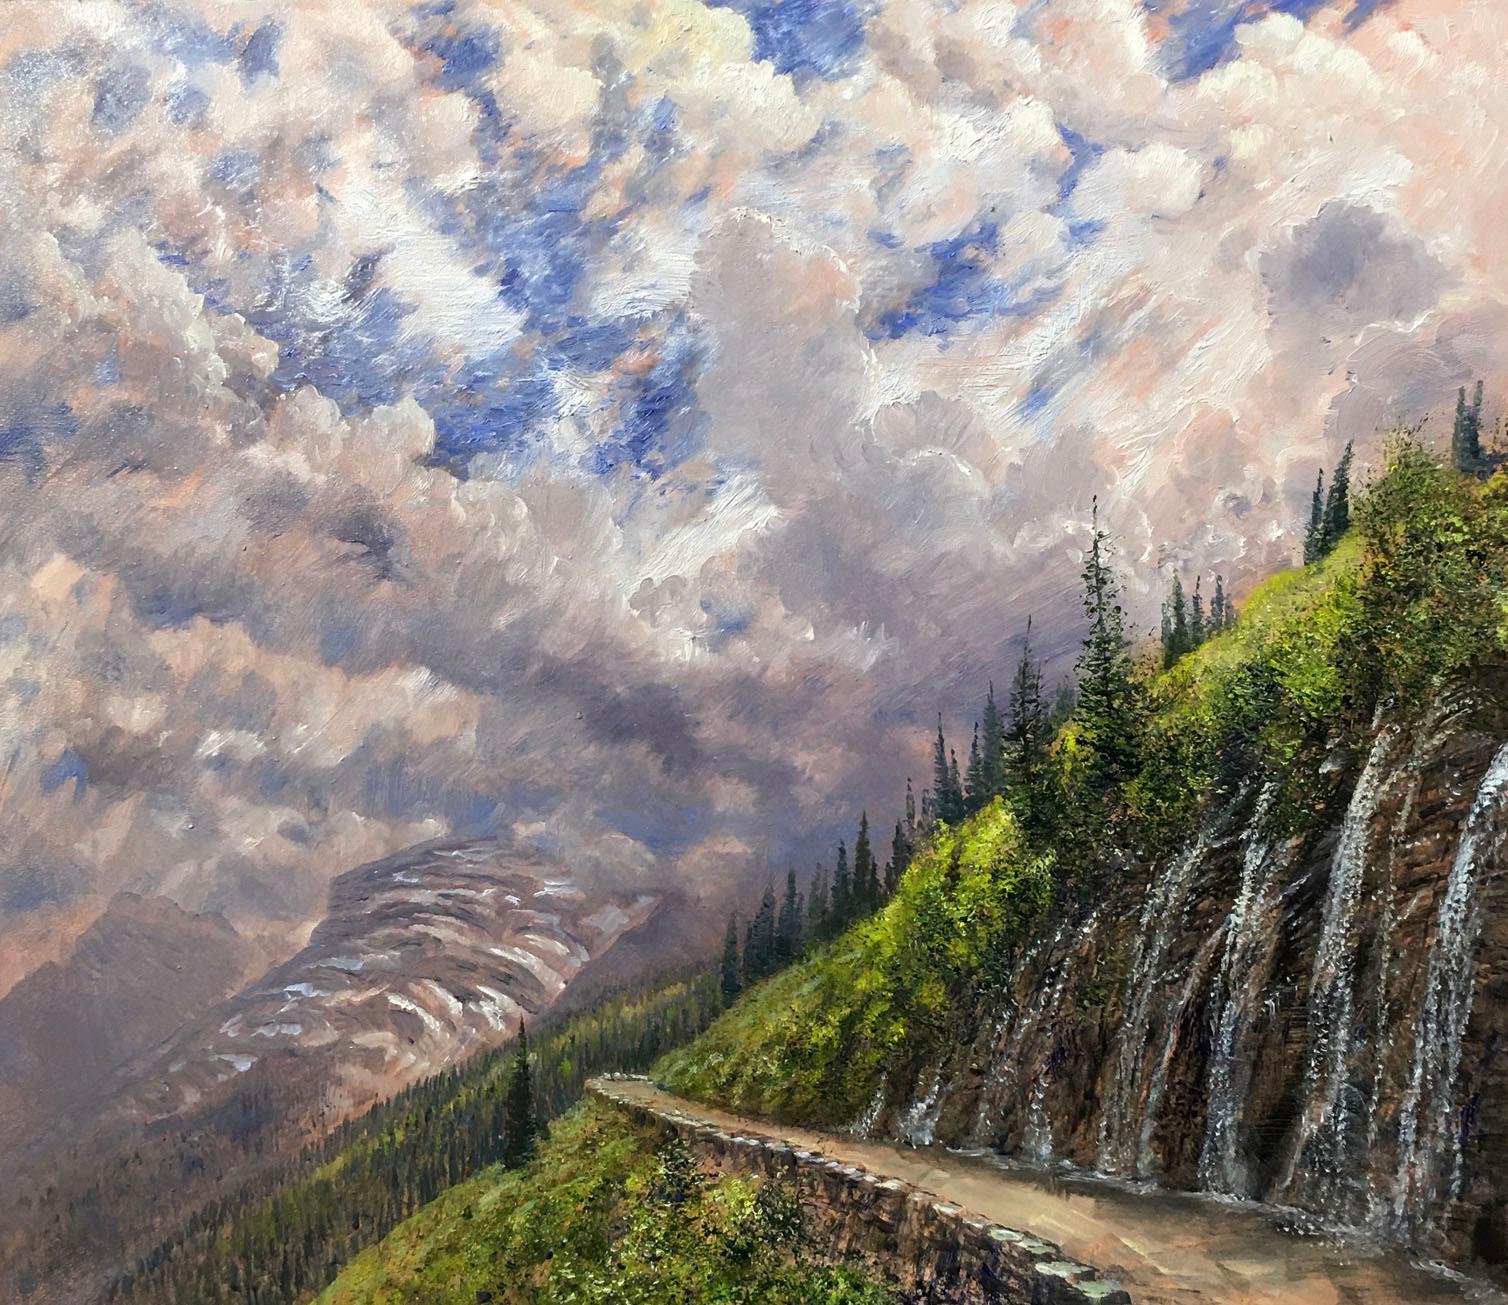 Nicholas Oberling Landscape Painting - Weeping Wall on the Going-to-the-Sun Road in Glacier National Park Montana